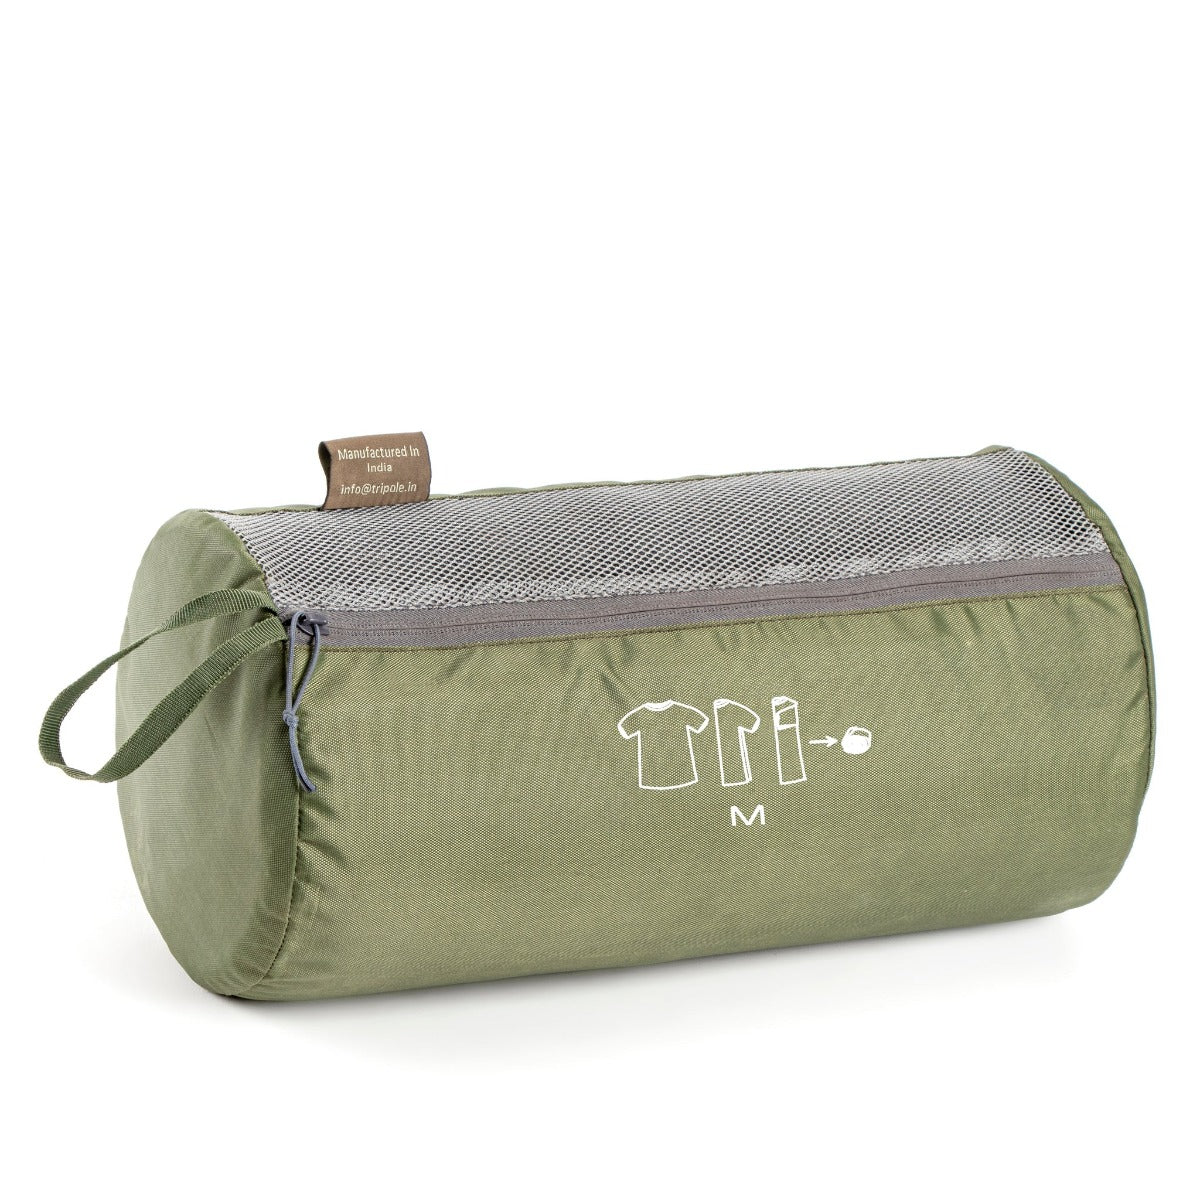 Organizer Packs - Cylindrical & Rectangle Shaped - Set of 6 - Army Green 2